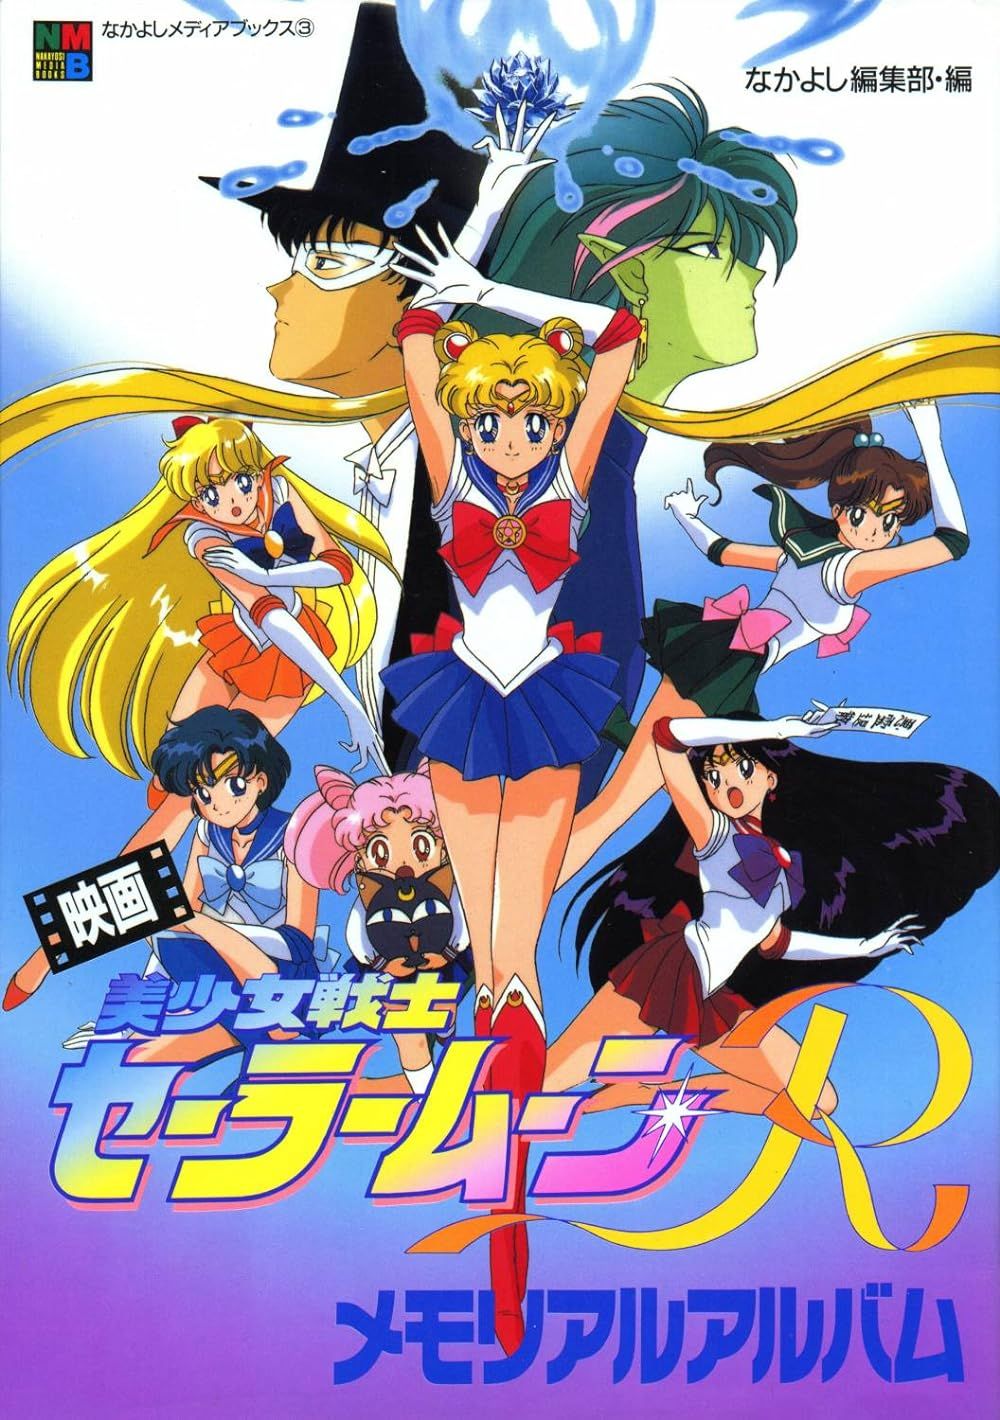 sailor moon: every standalone movie, ranked